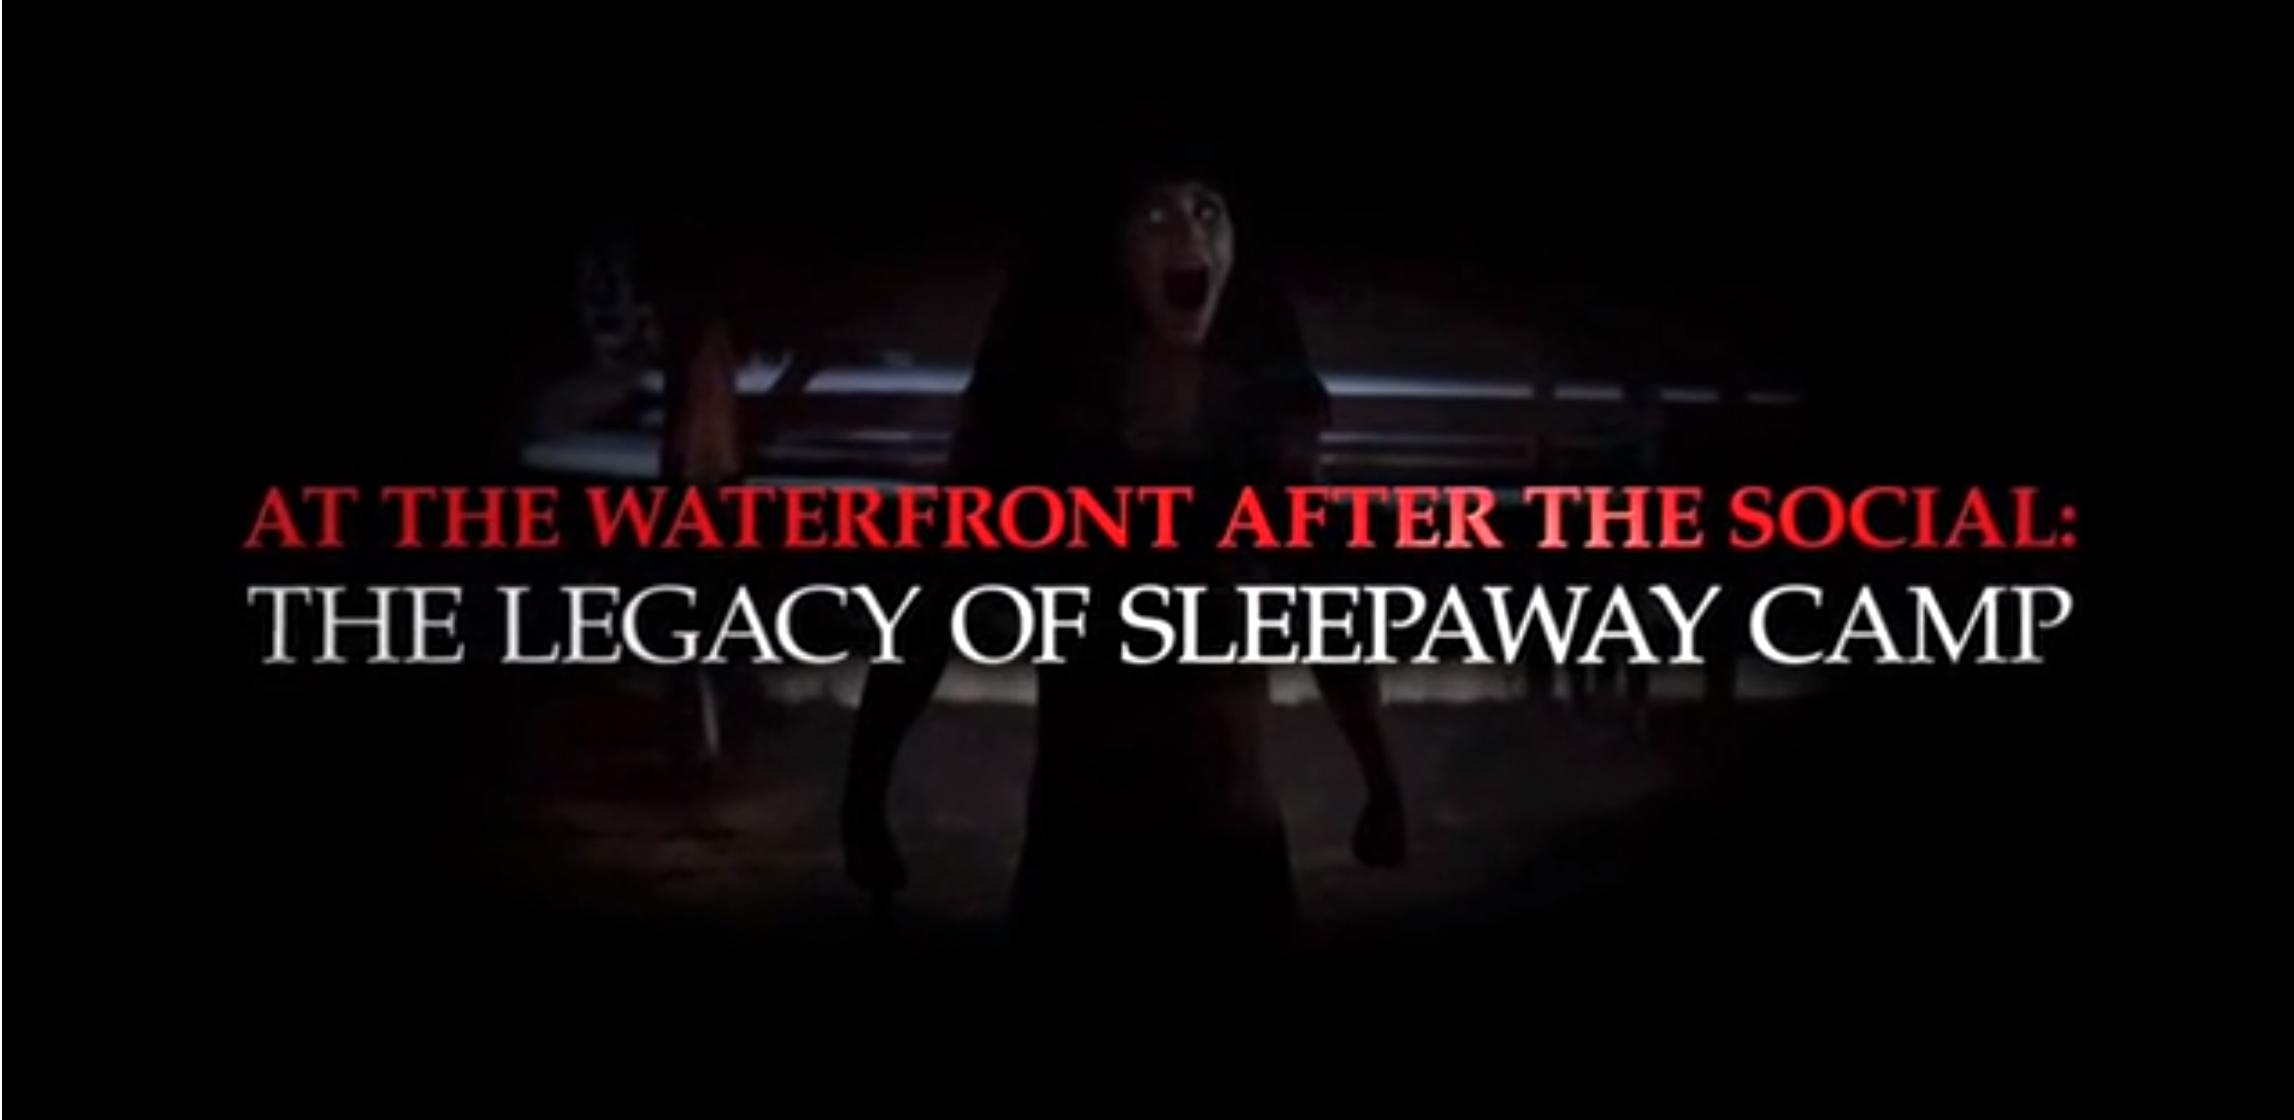 At the Waterfront After the Social: The Legacy of Sleepaway Camp (2014) Screenshot 2 